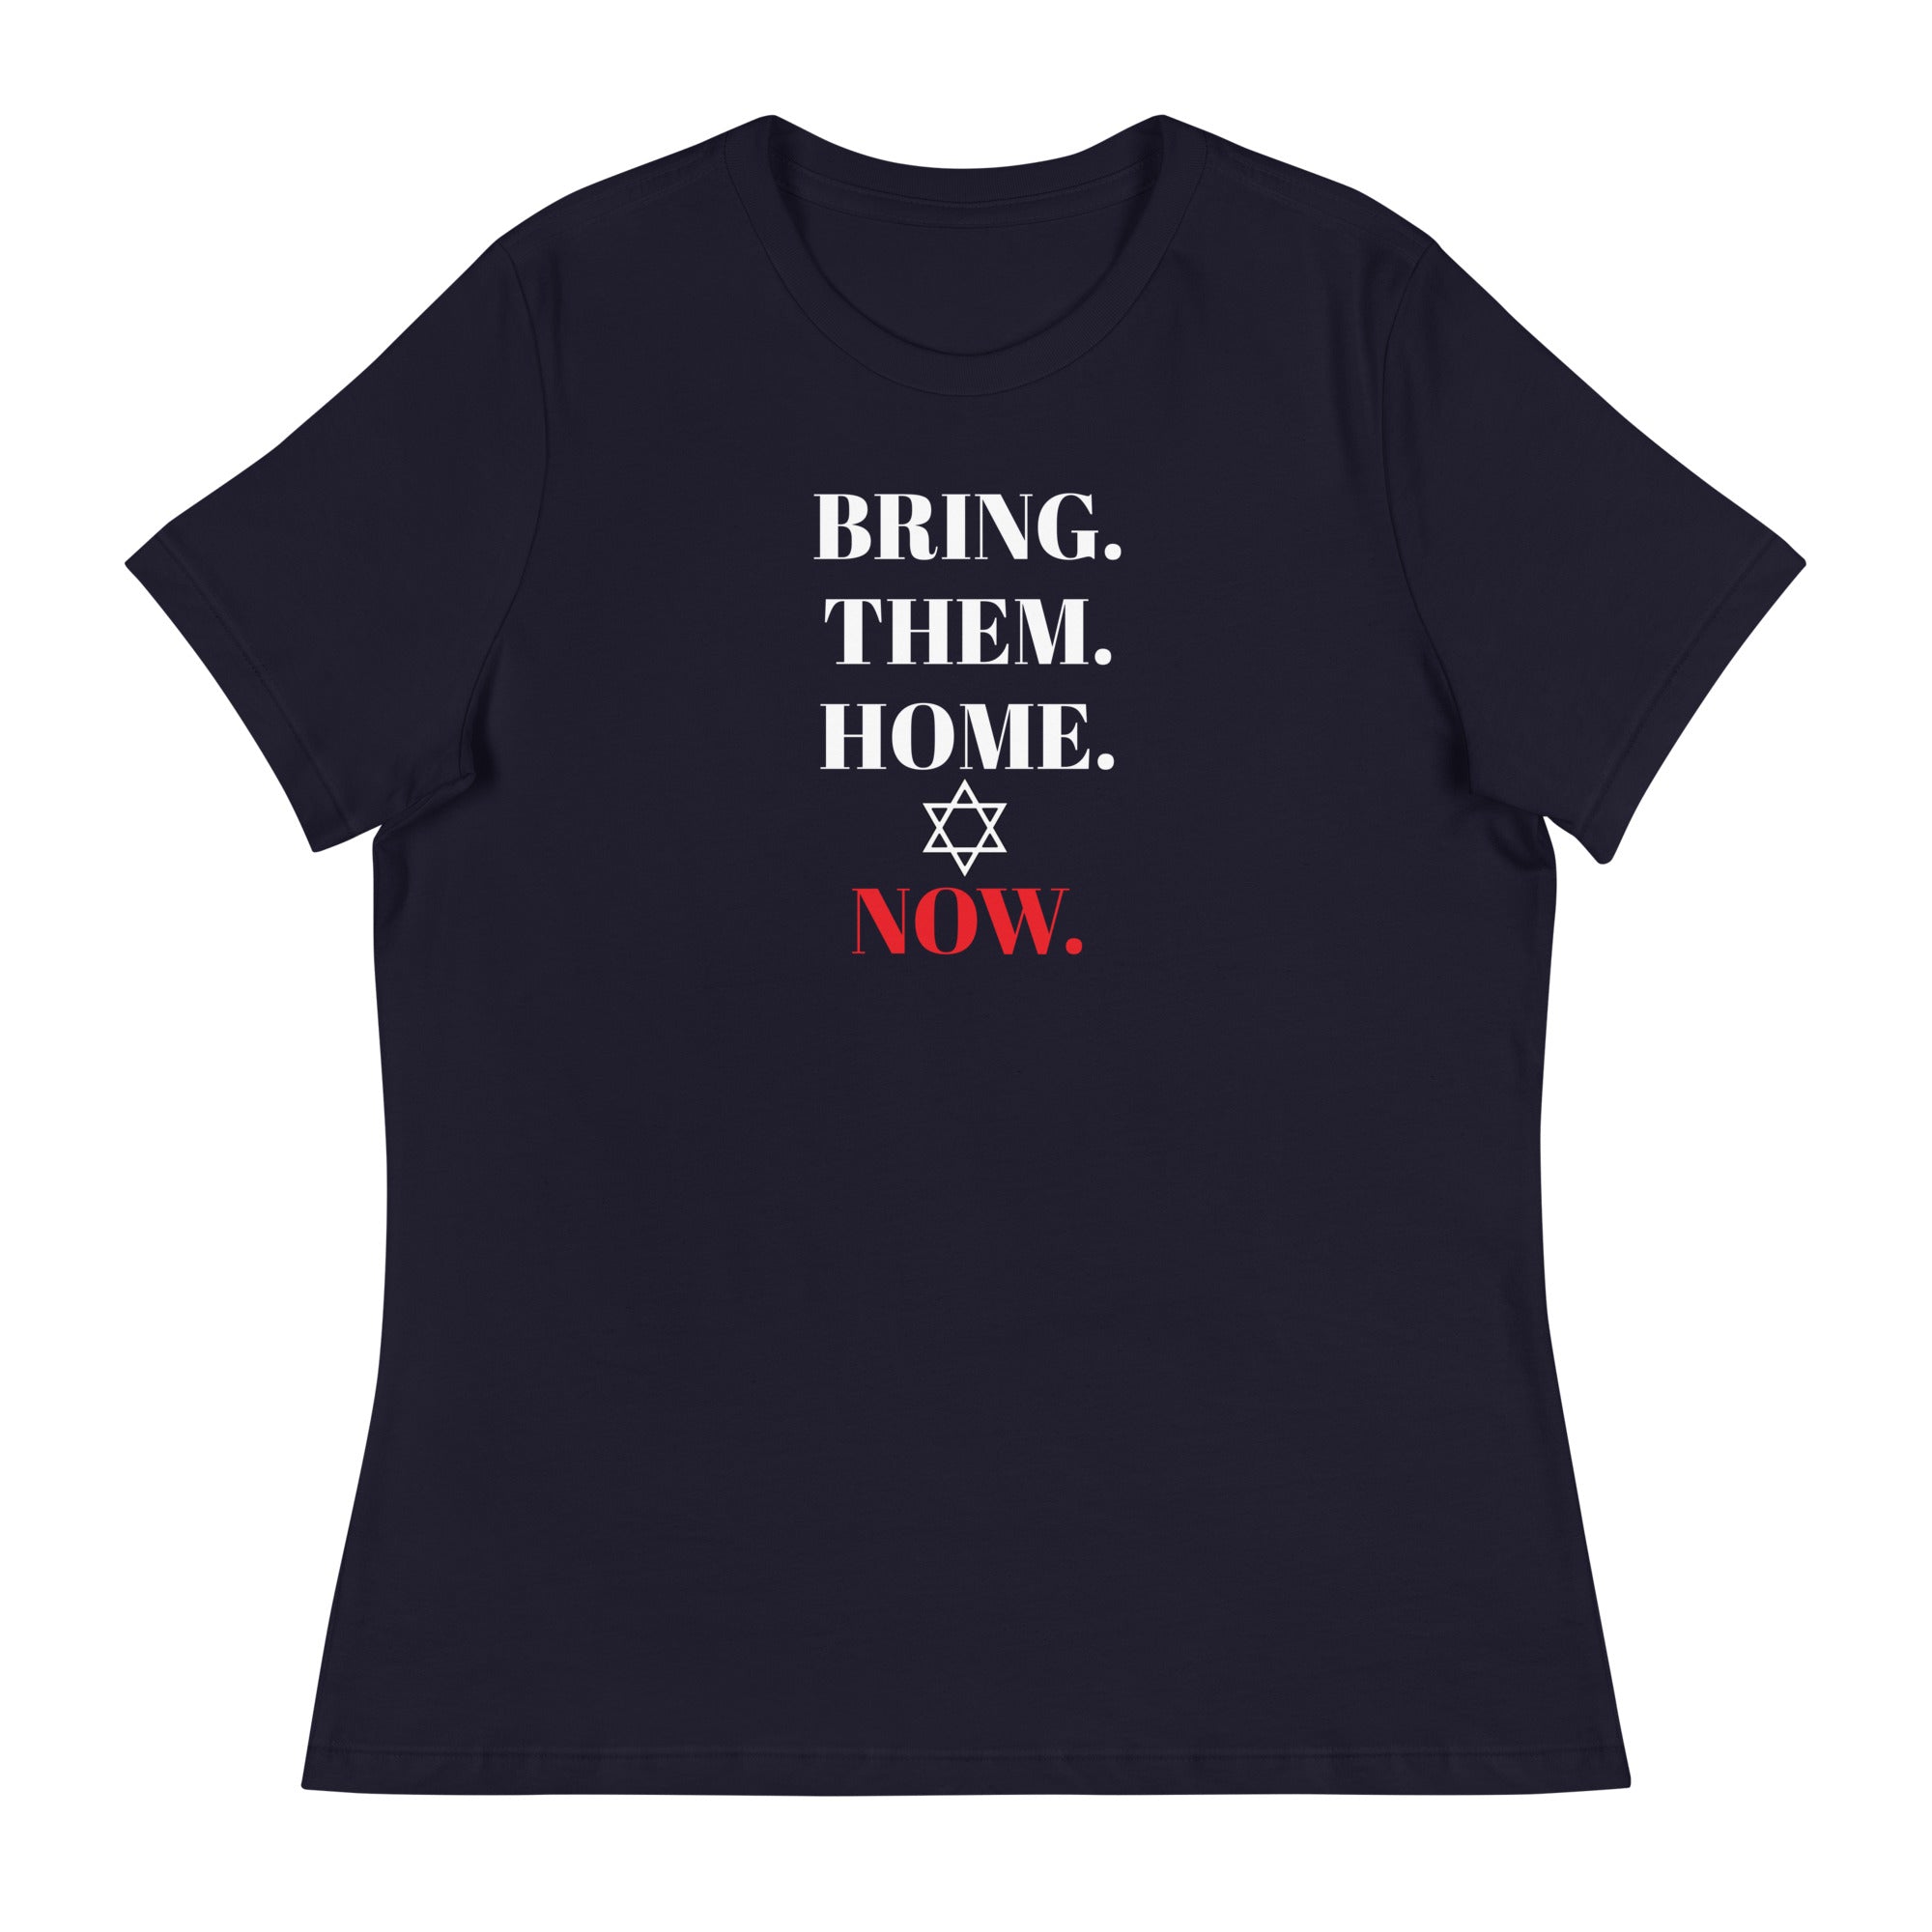 Bring Them Home Now - Women's Relaxed T-Shirt